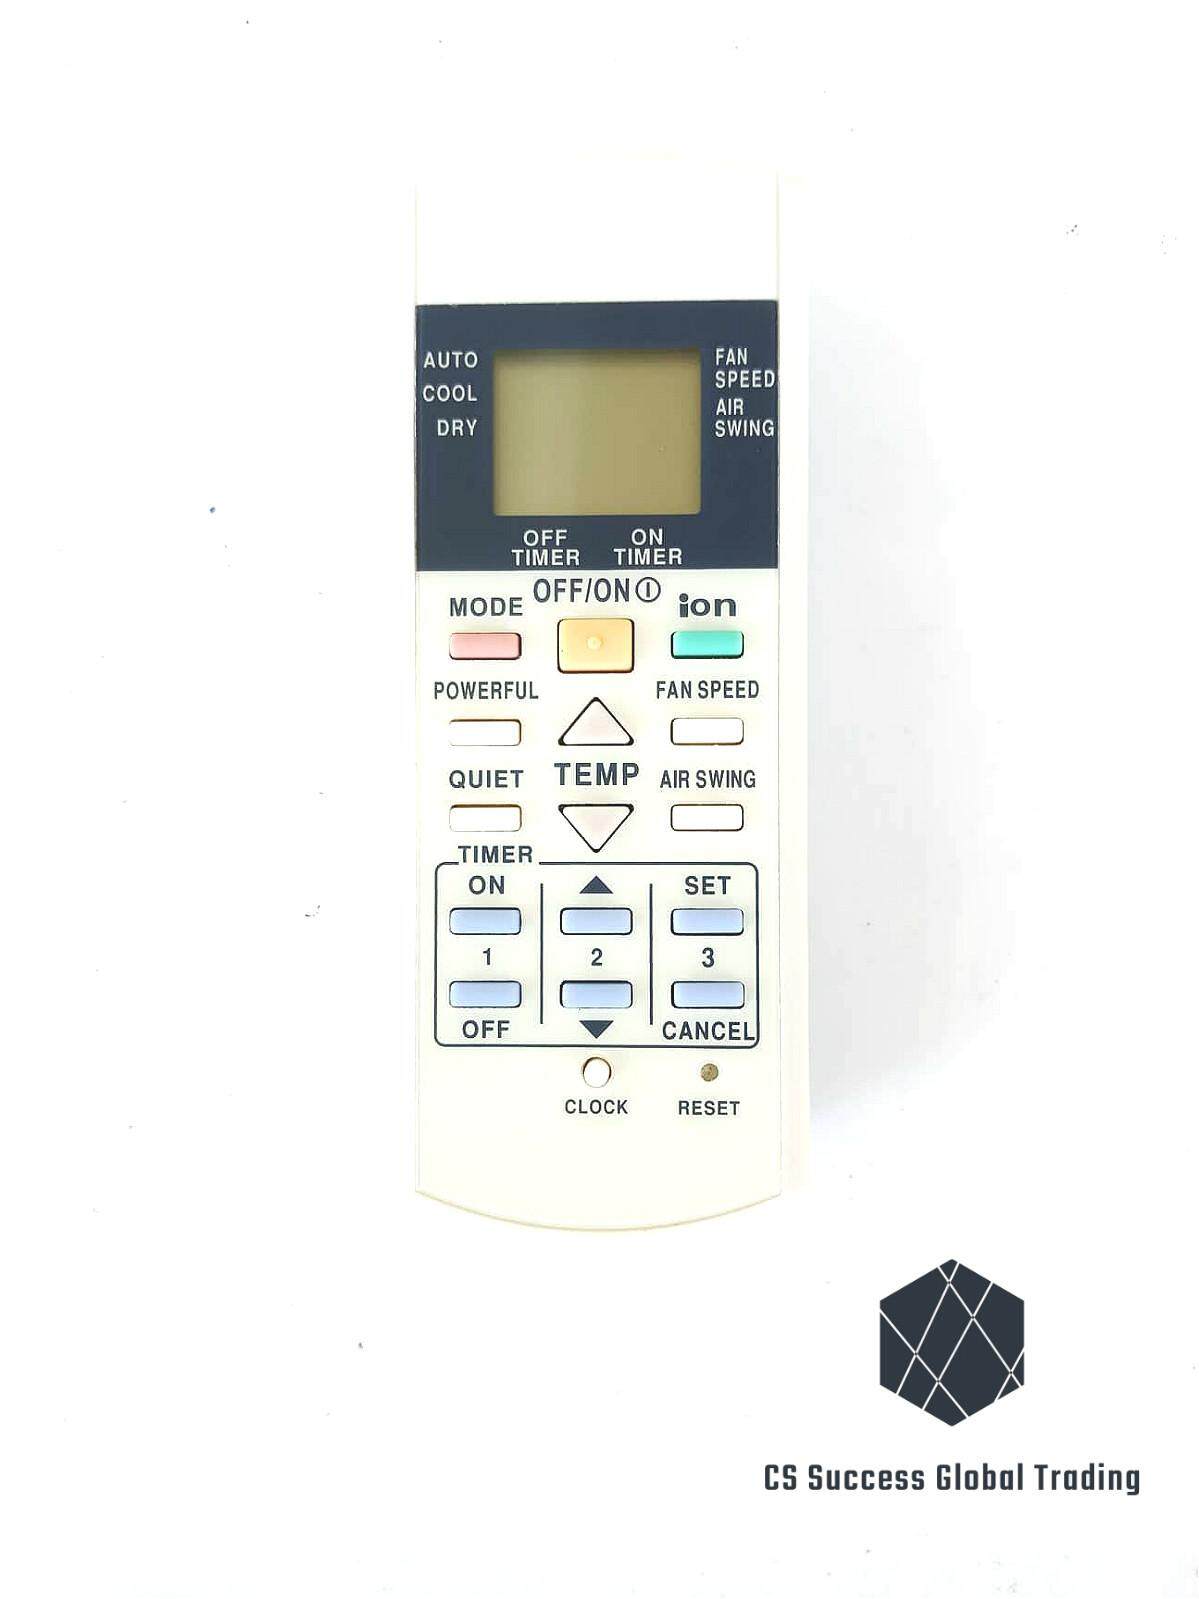 A75C2600 A/C Replacement Remote Control For Panasonic